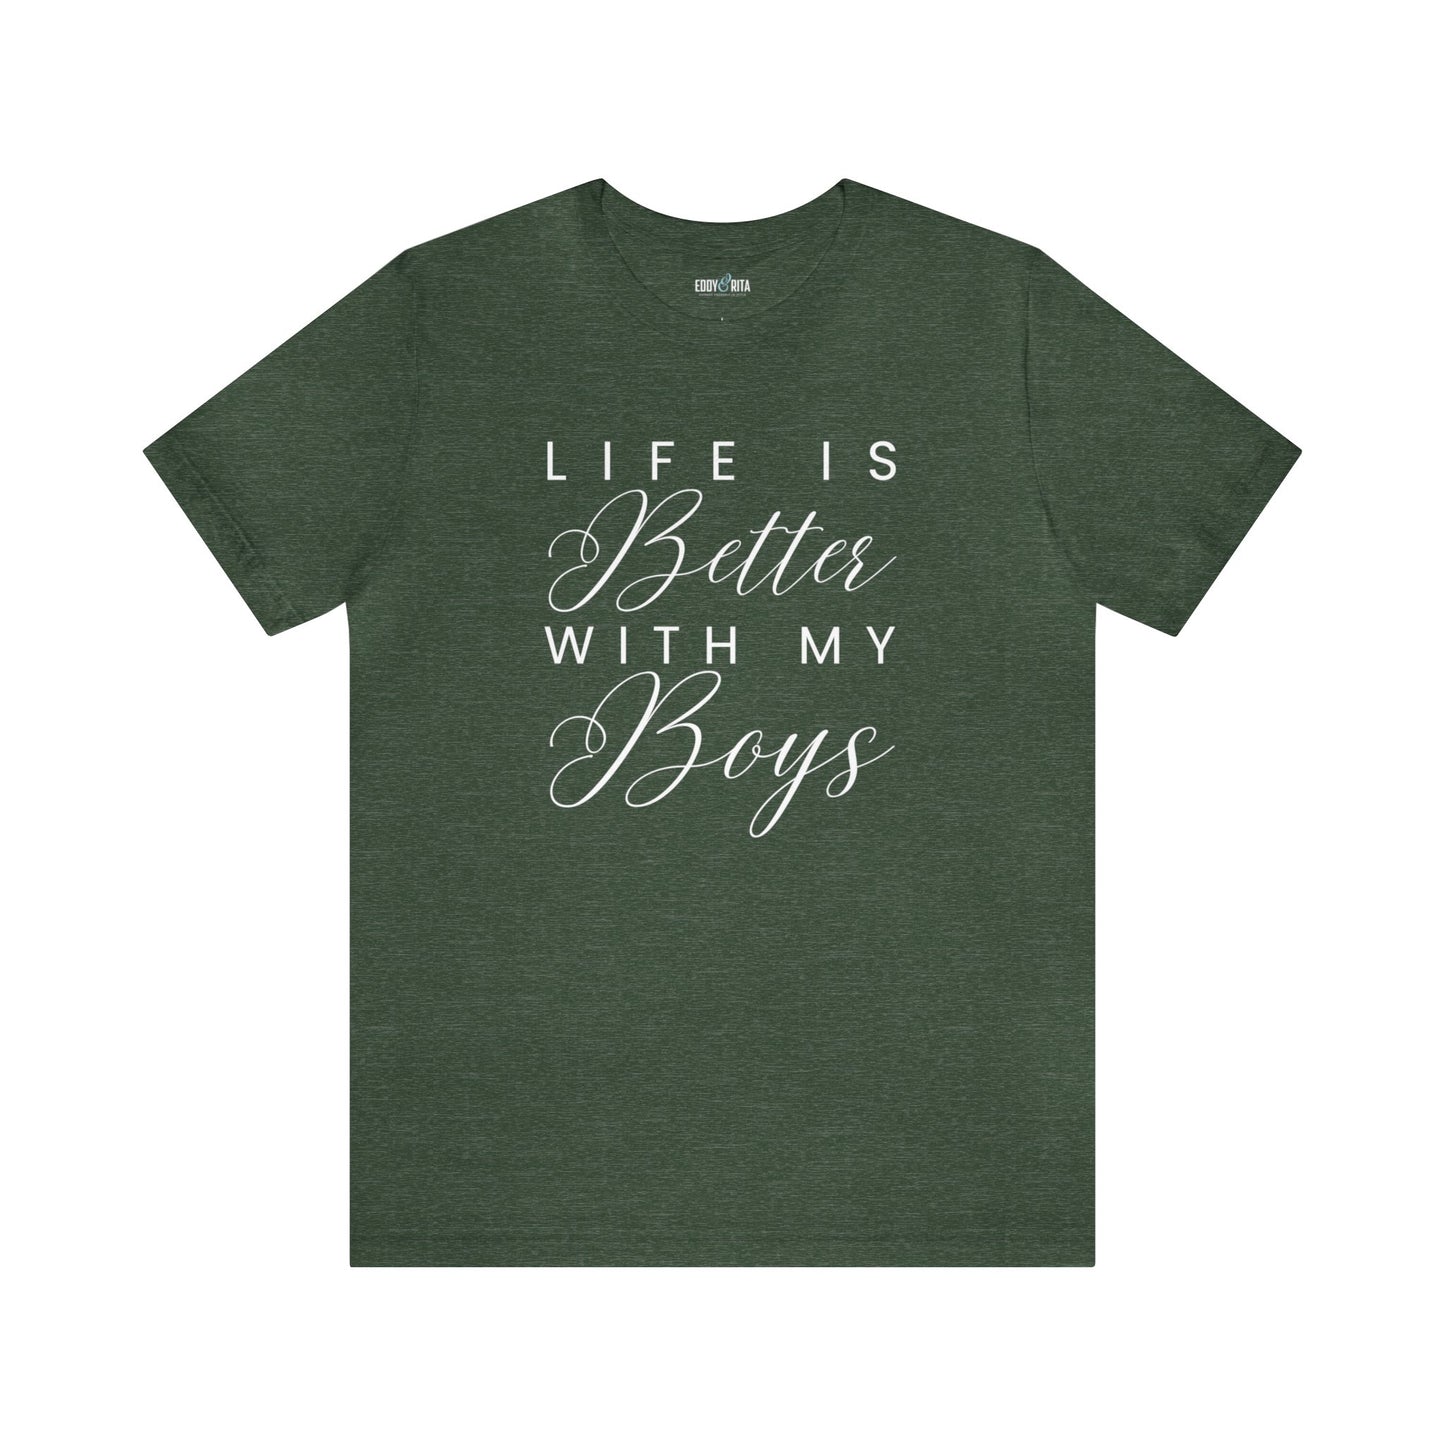 Life is Better with My Boys Women's Tee - Comfortable and Stylish Shirt for Moms - Eddy and Rita